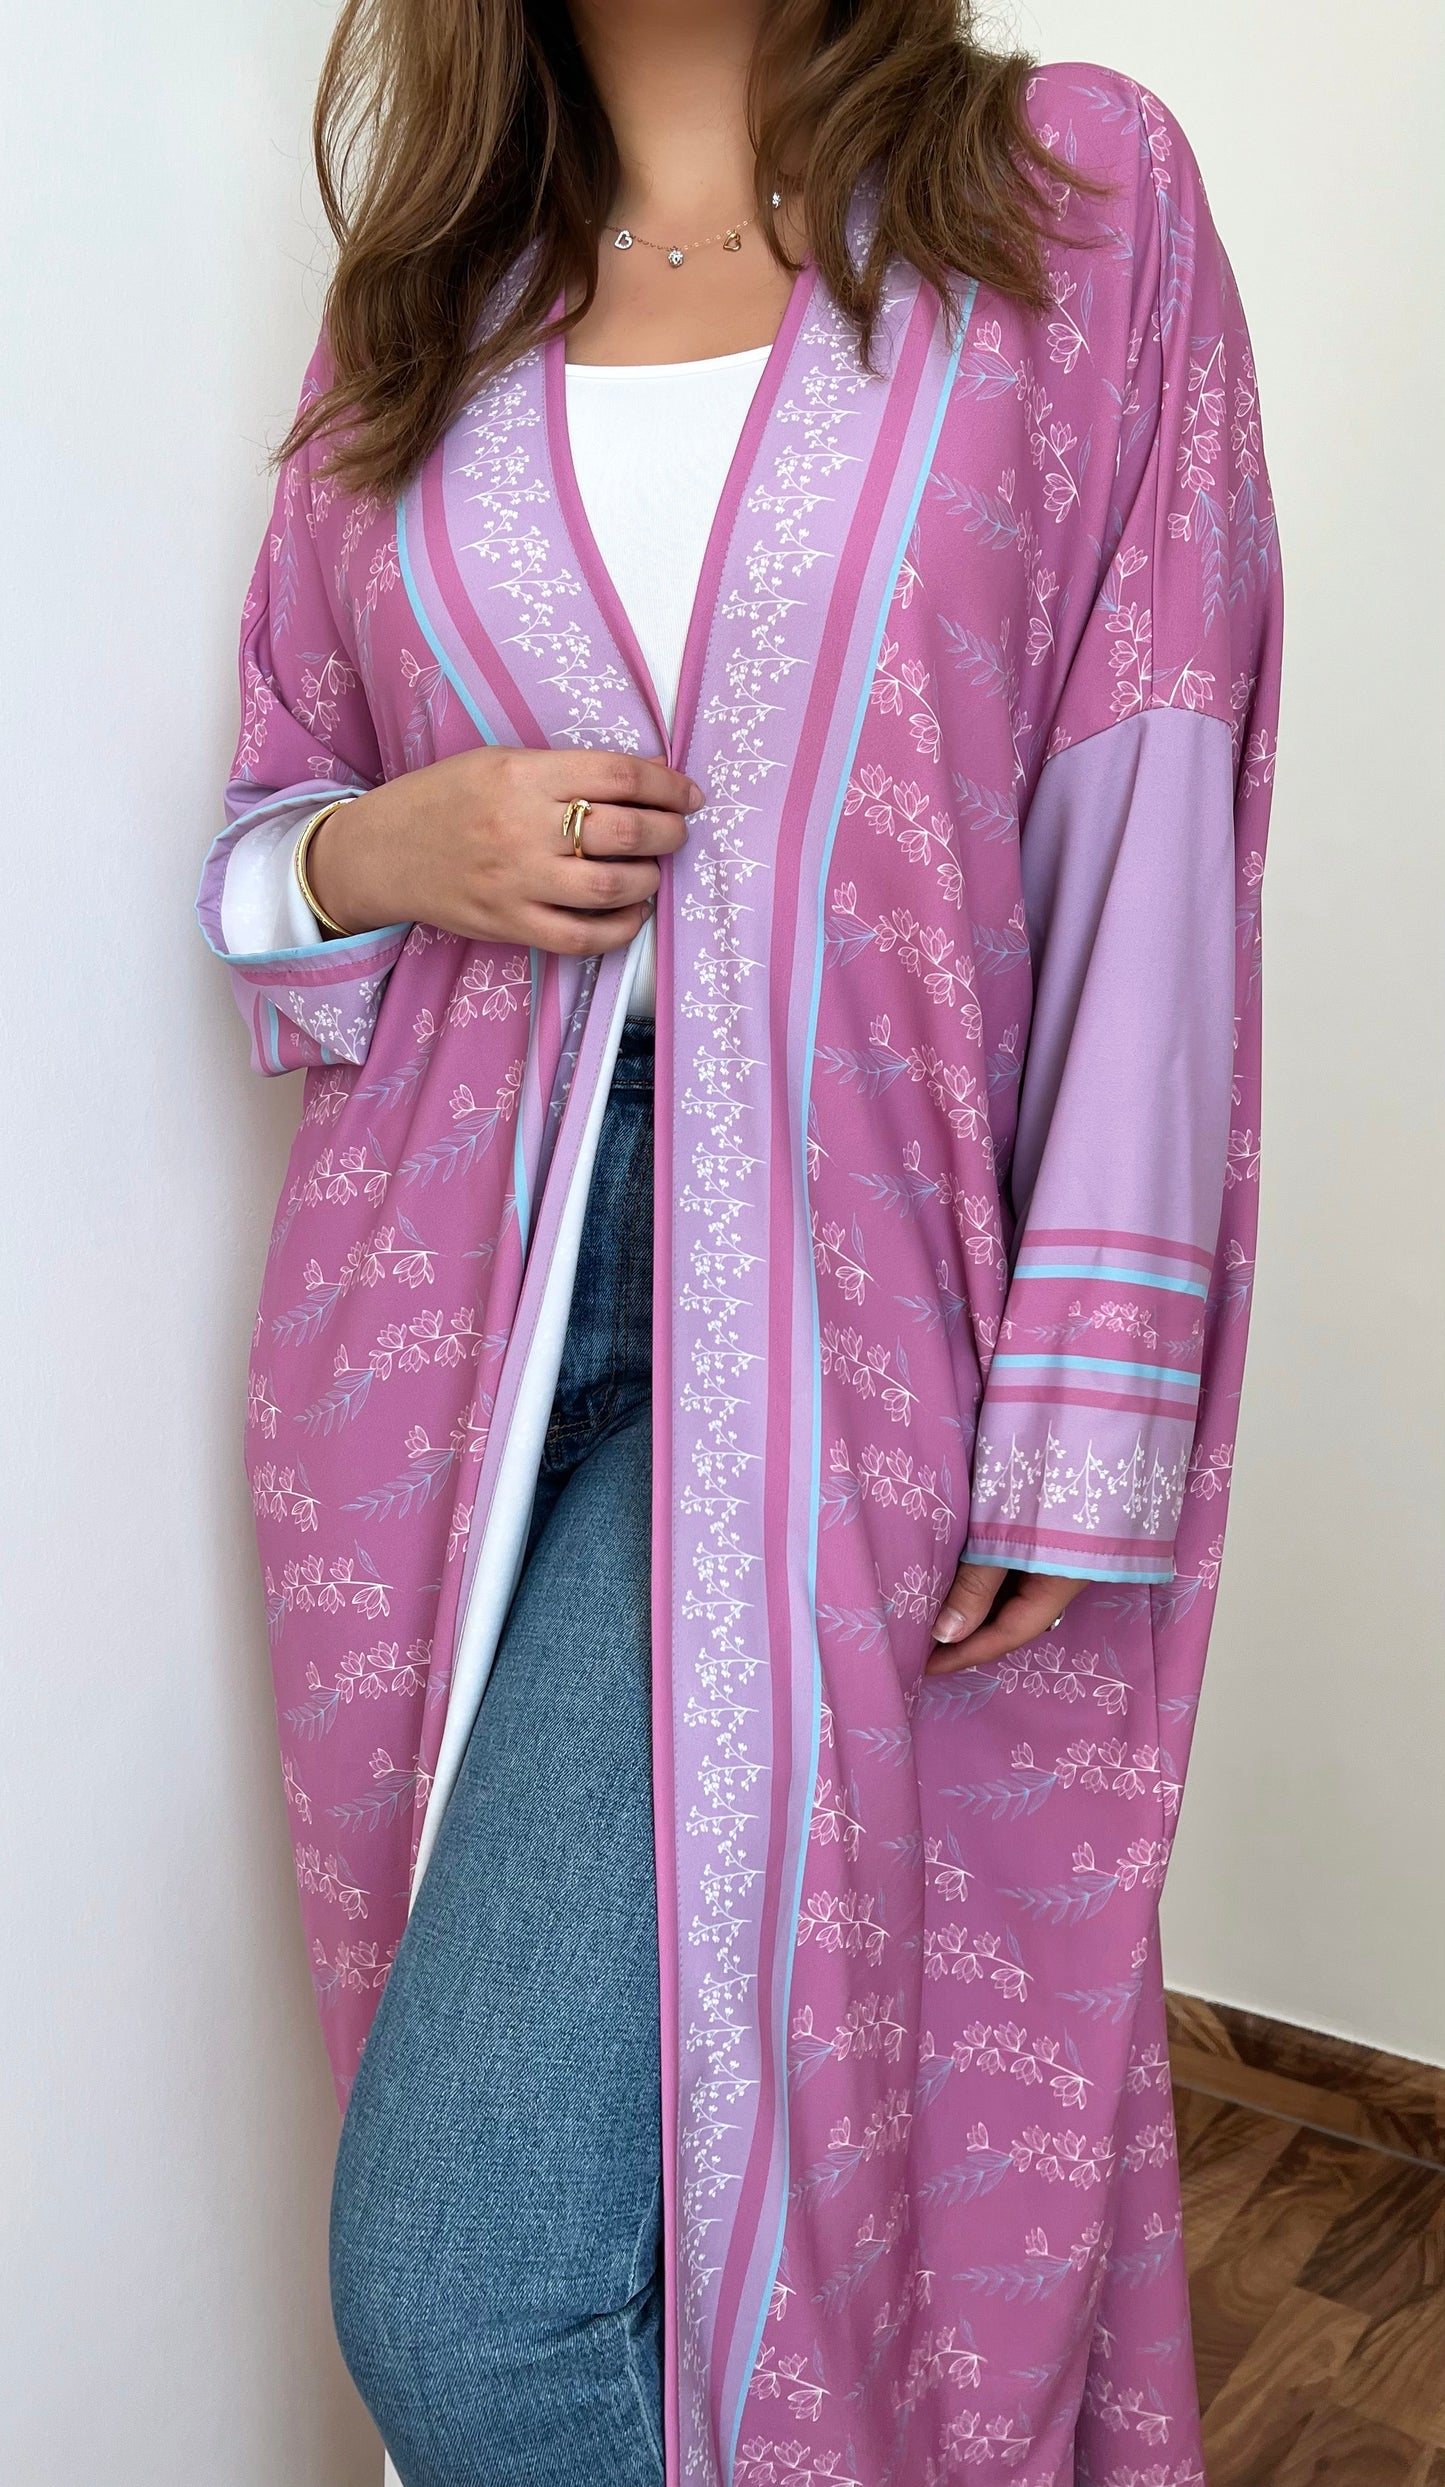 Load image into Gallery viewer, The Muse - Comfy TUP printed Kimono - Online Shopping - The Untitled Project
